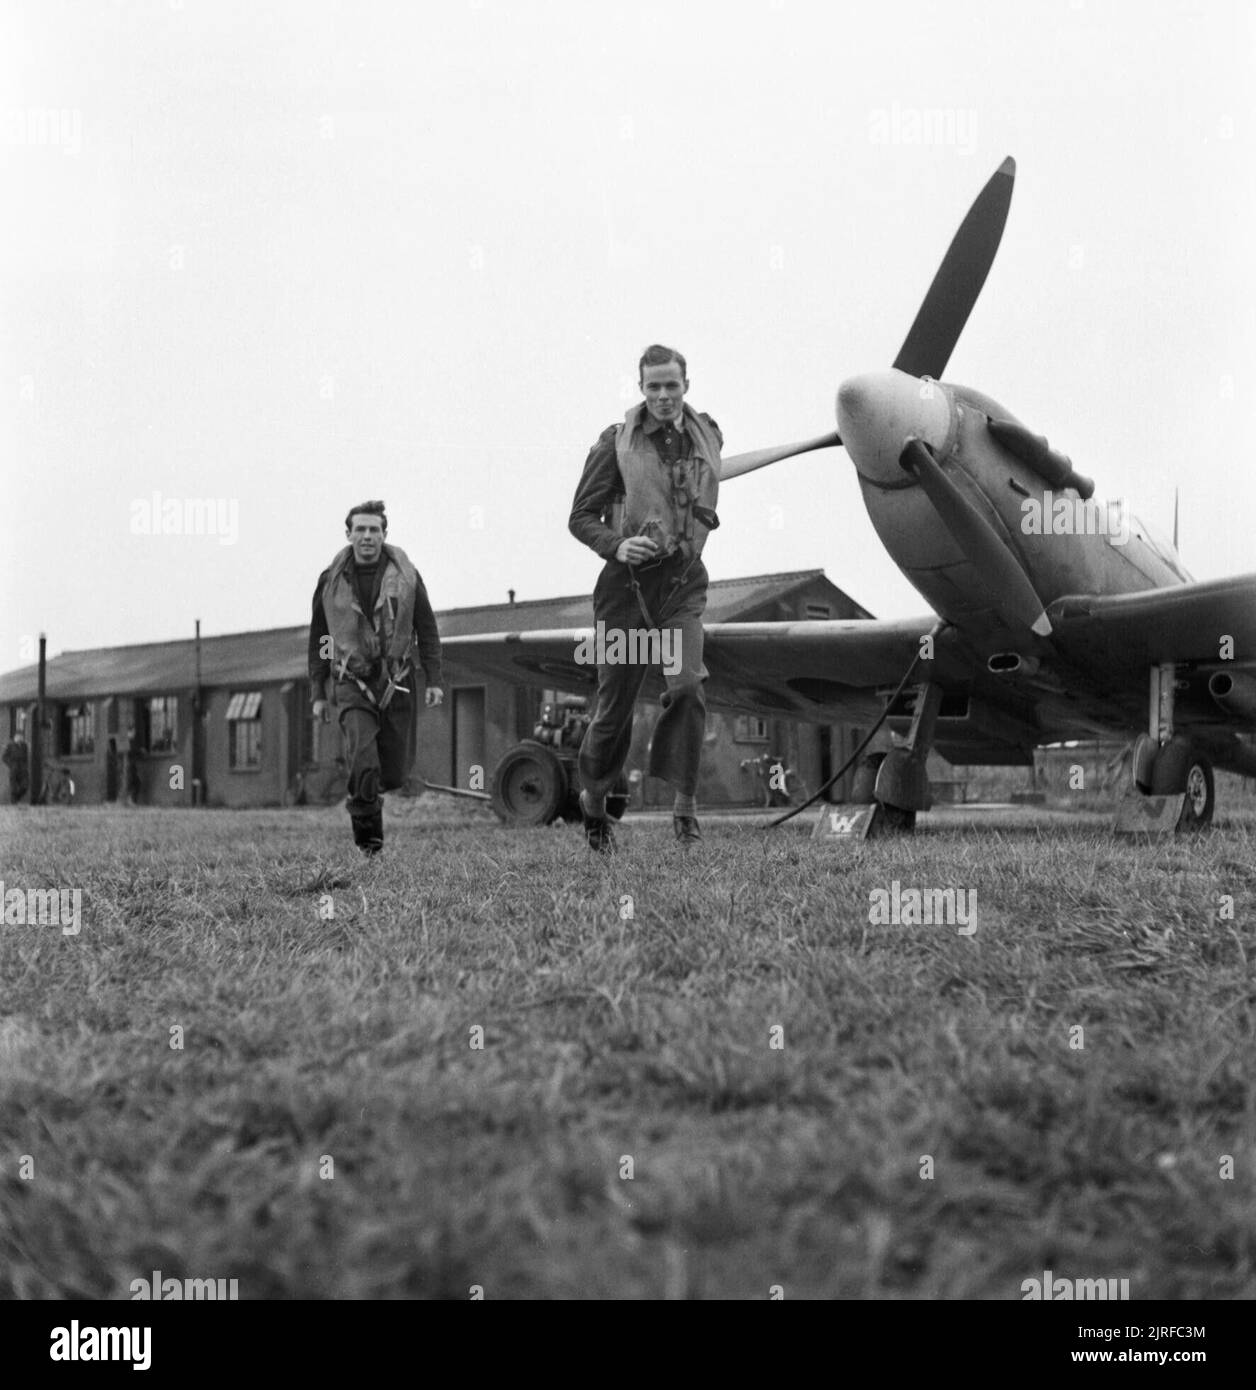 American volunteer pilots of No.121 (Eagle) Squadron run to their aircraft at RAF Rochford in Essex, August 1942. Flying Officer Barry Mahon (left) and Flight Lieutenant Seldon R Edner run to their aircraft as they are given the order to scramble. Both men are from California. The original caption states that enemy aircraft had appeared at 25,000 feet, seven miles south of the station, hence the need for action. Stock Photo